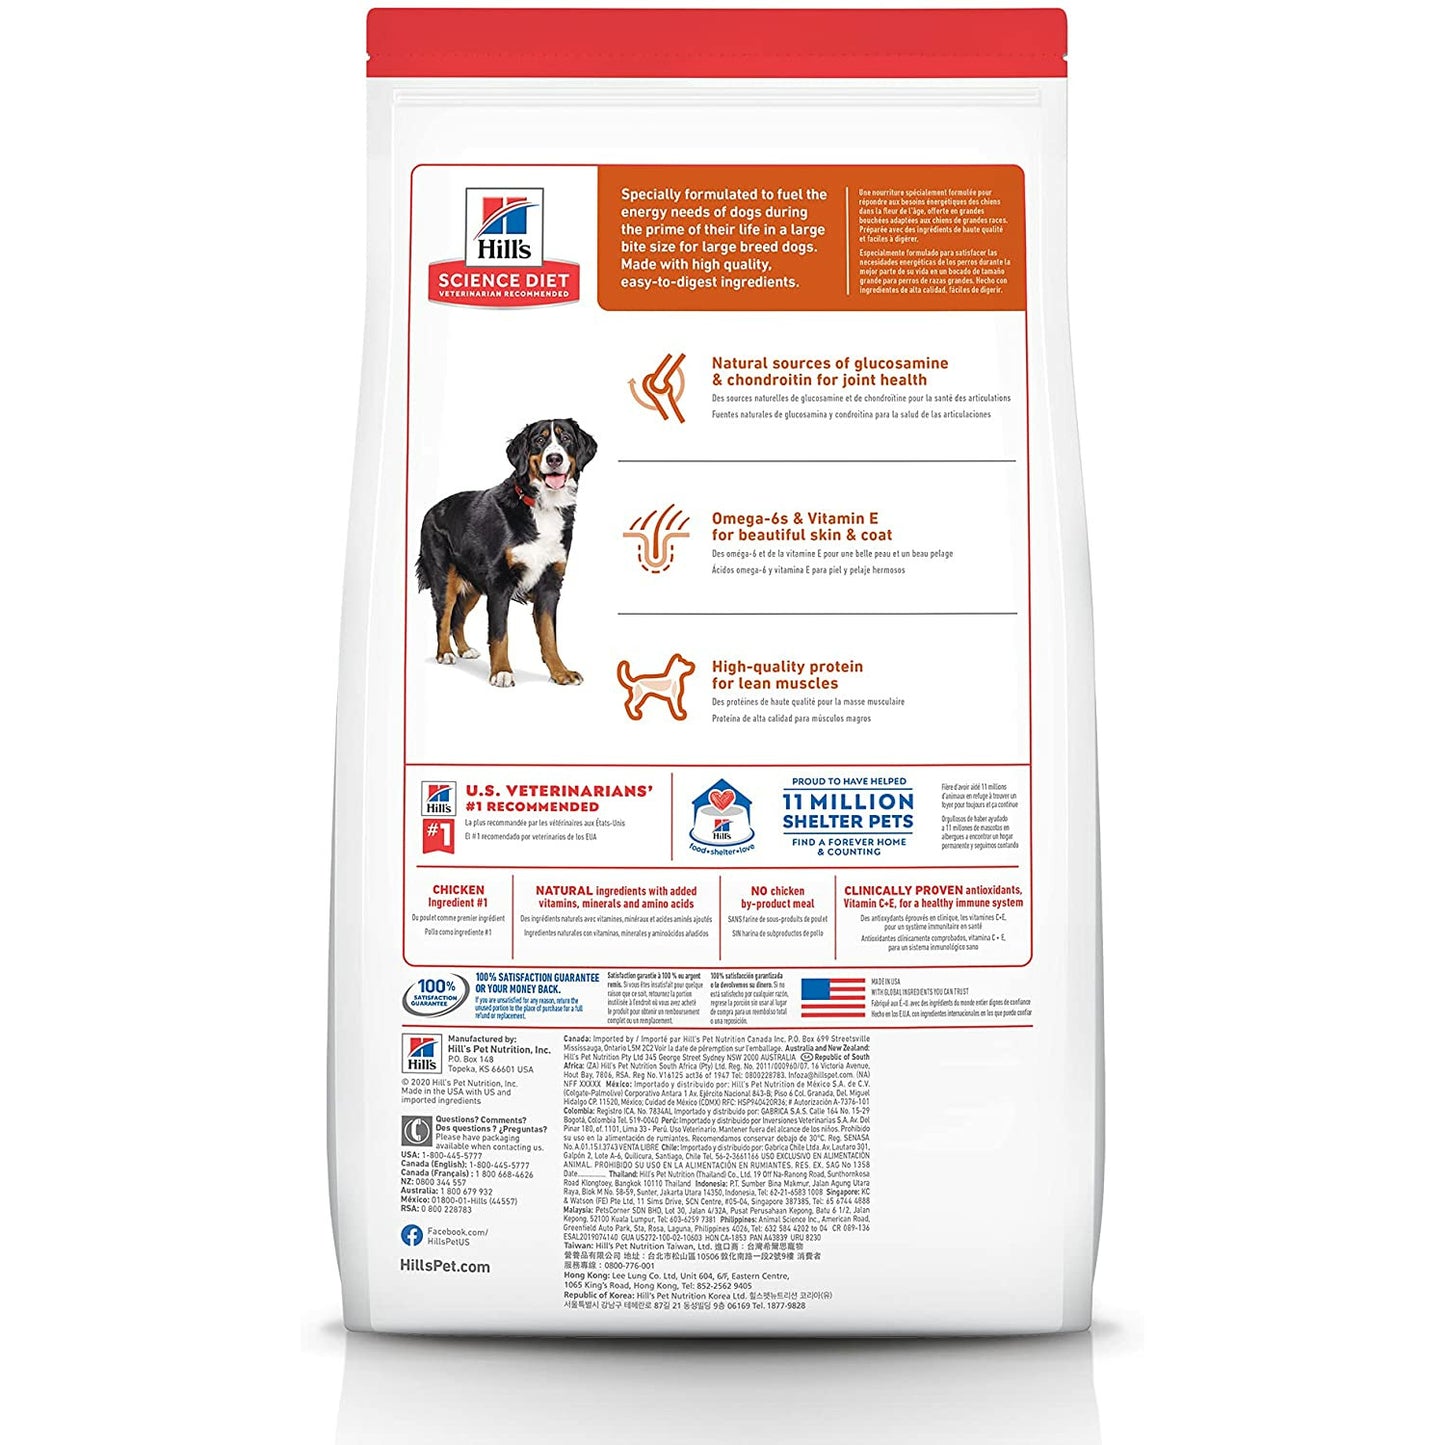 Hill's Science Diet Dry Dog Food Adult 1-5 Large Breed Chicken  Dog Food  | PetMax Canada